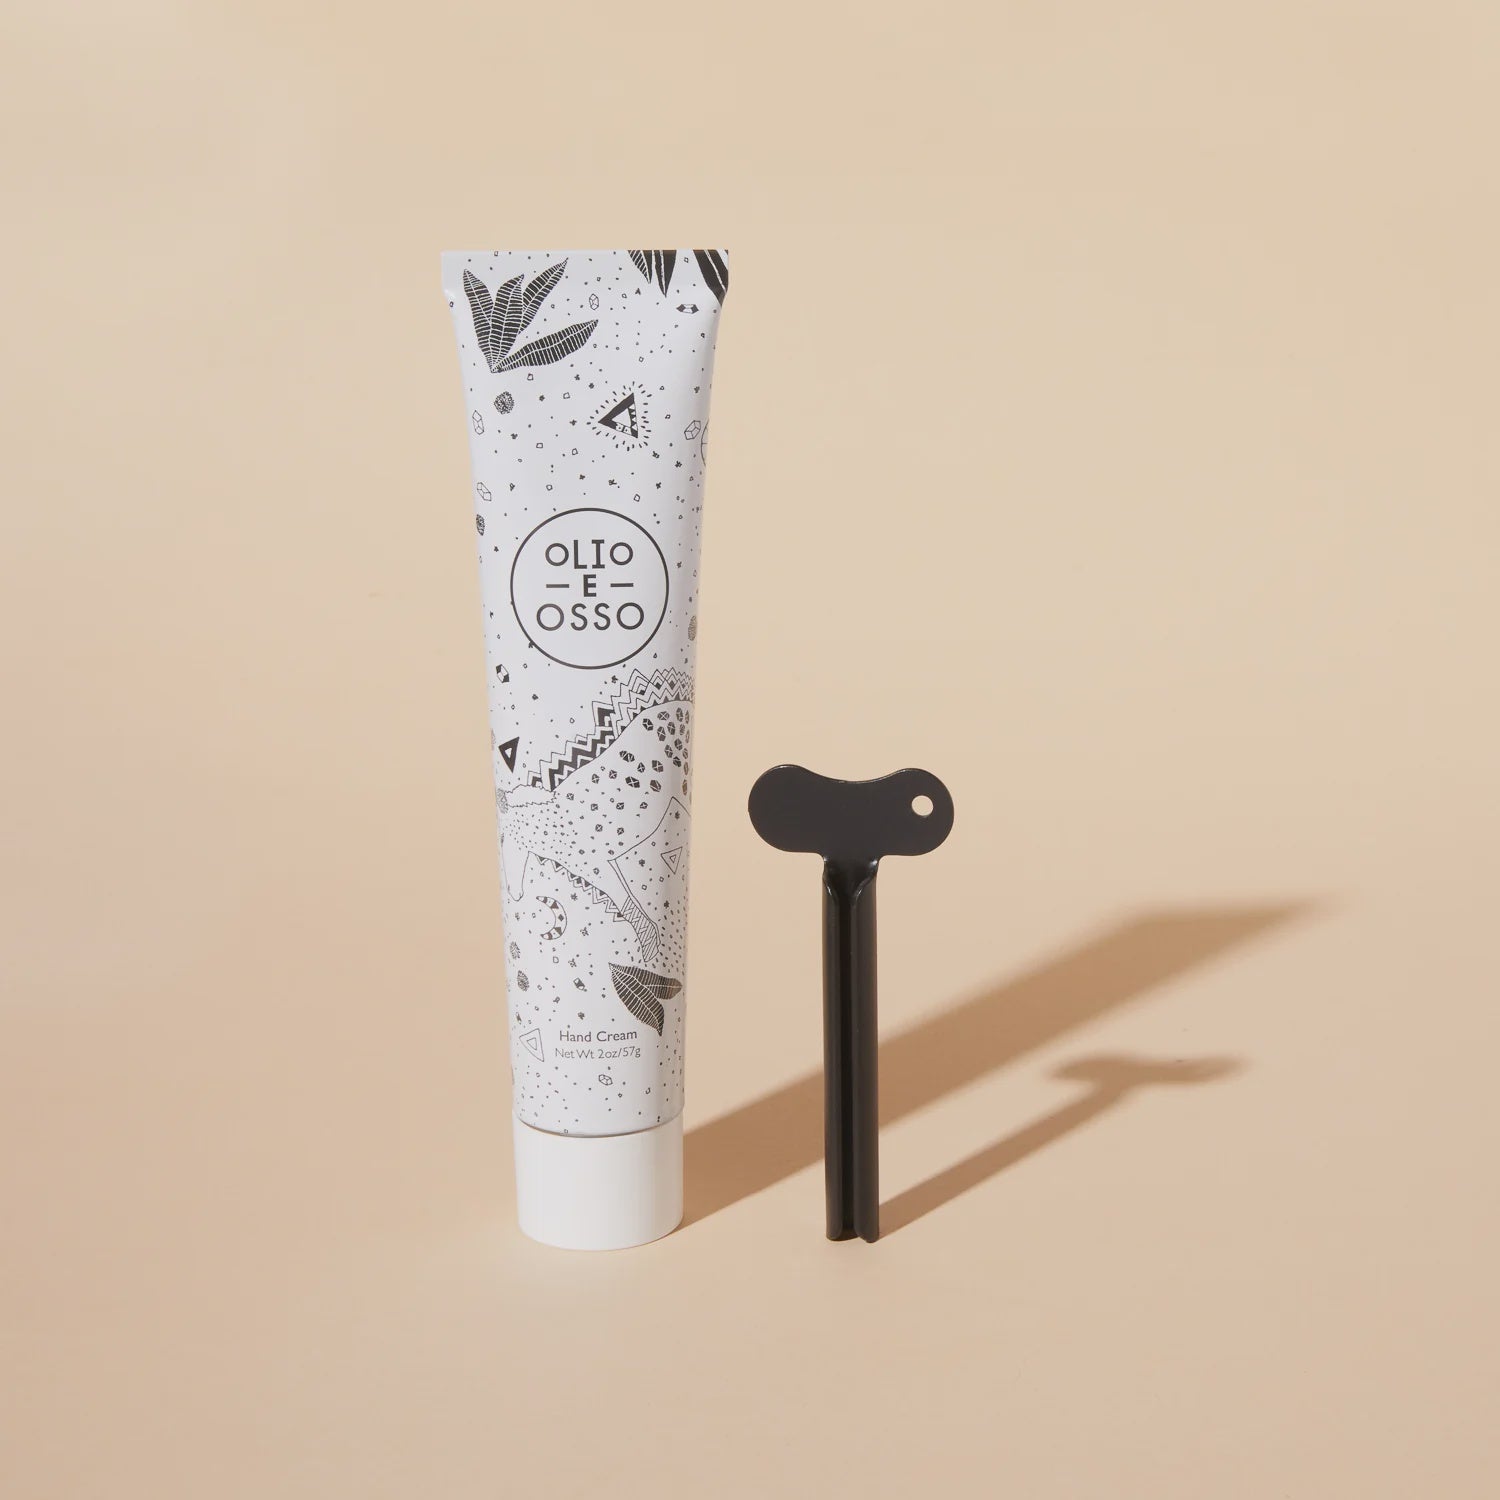 A tube of Olio E Osso hand cream placed next to a black T-shaped applicator on a light beige background. The tube features a stylish black and white geometric pattern inspired by Scottsdale Arizona.